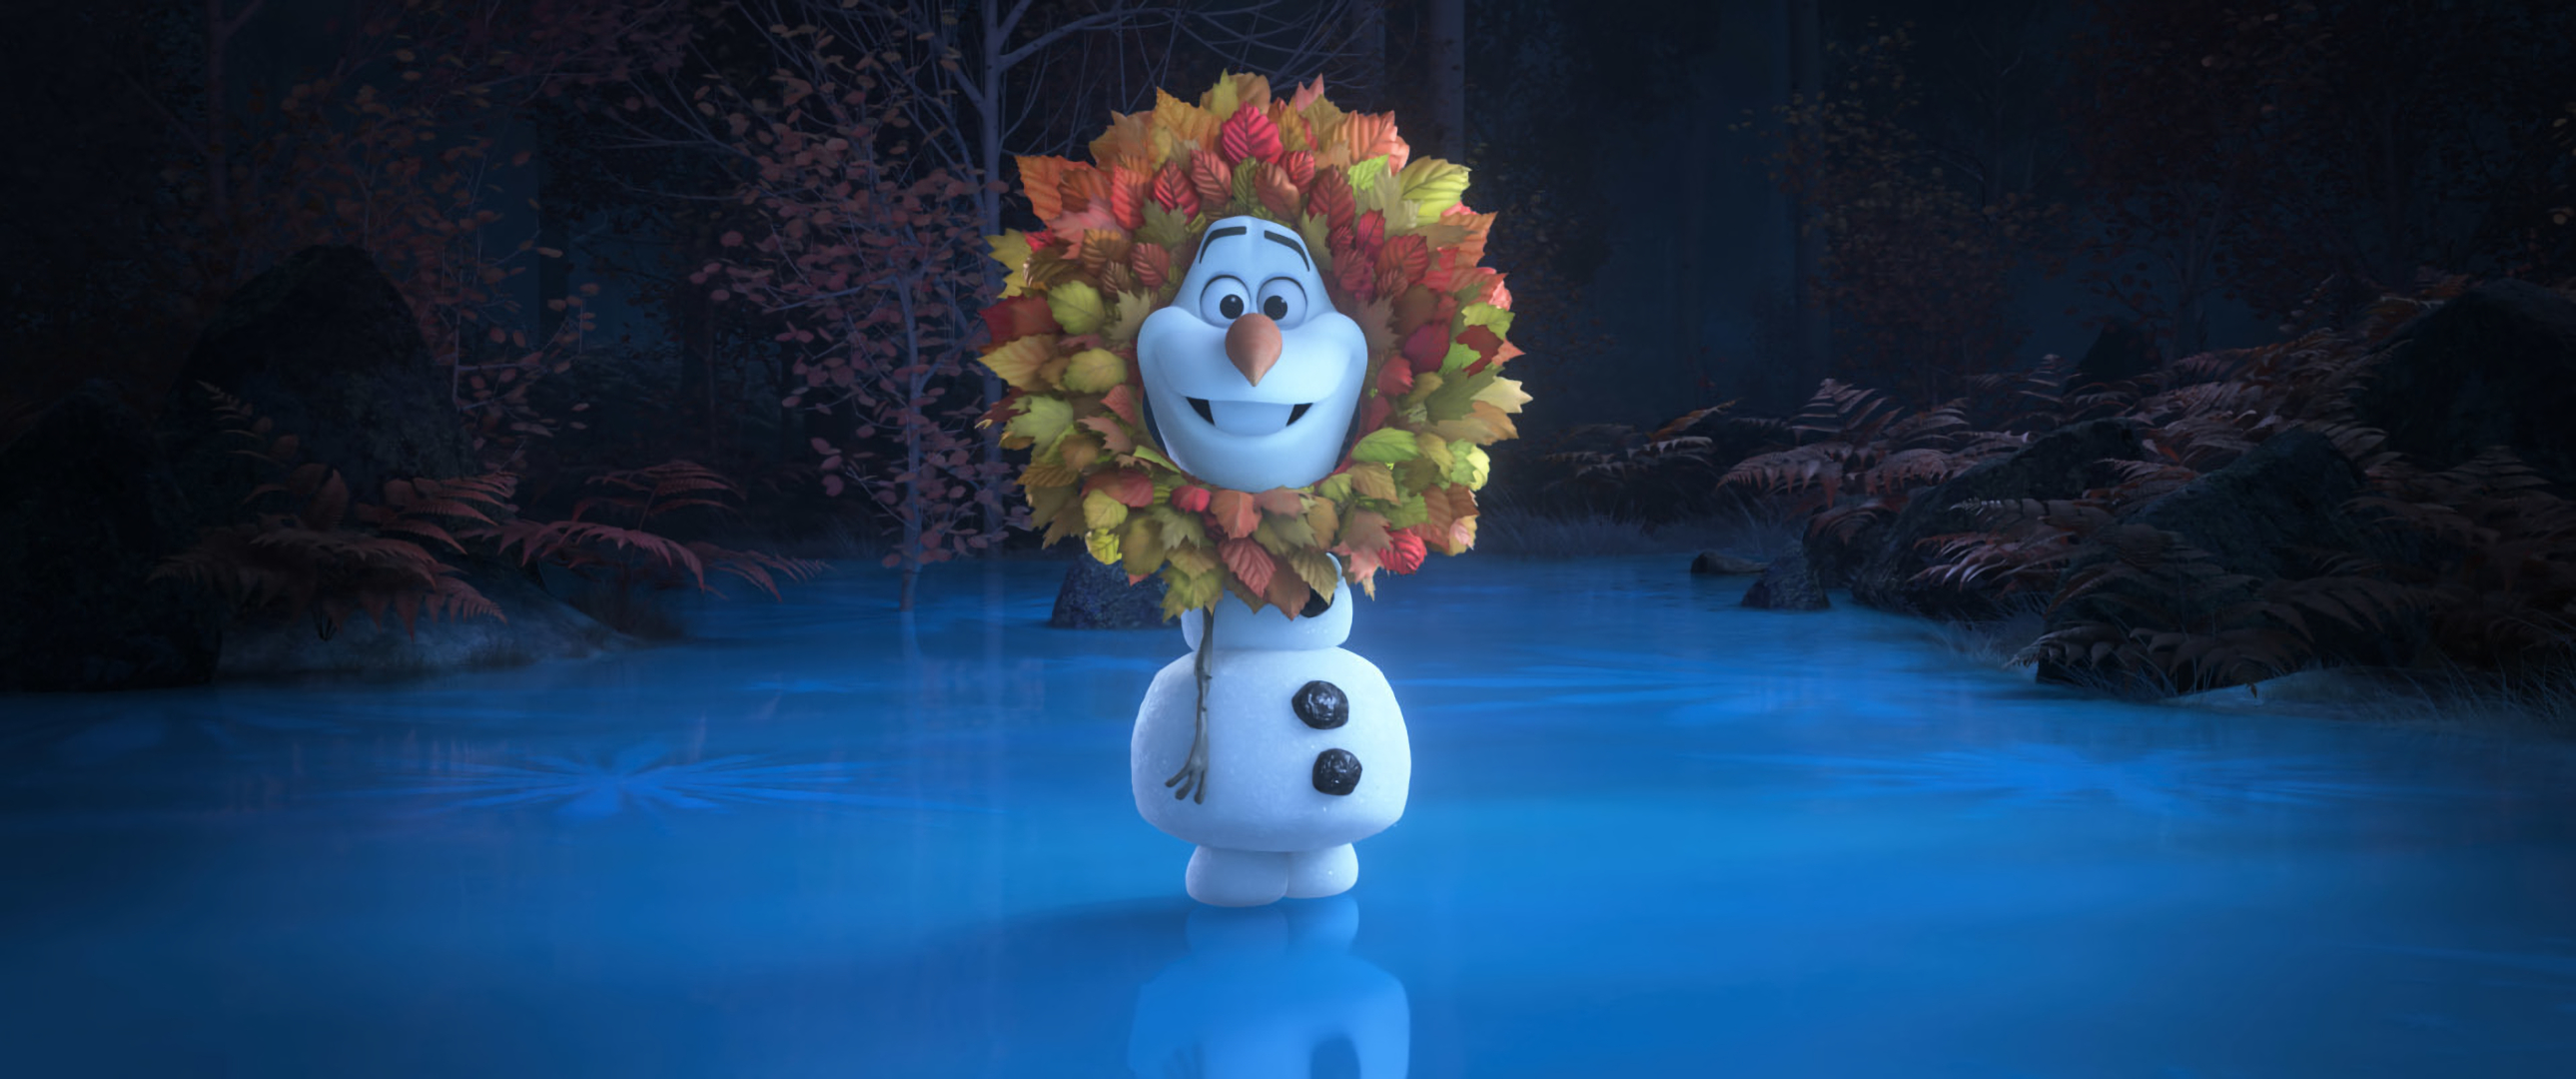 2579x1080 70+ Olaf (Frozen) HD Wallpapers and Backgrounds